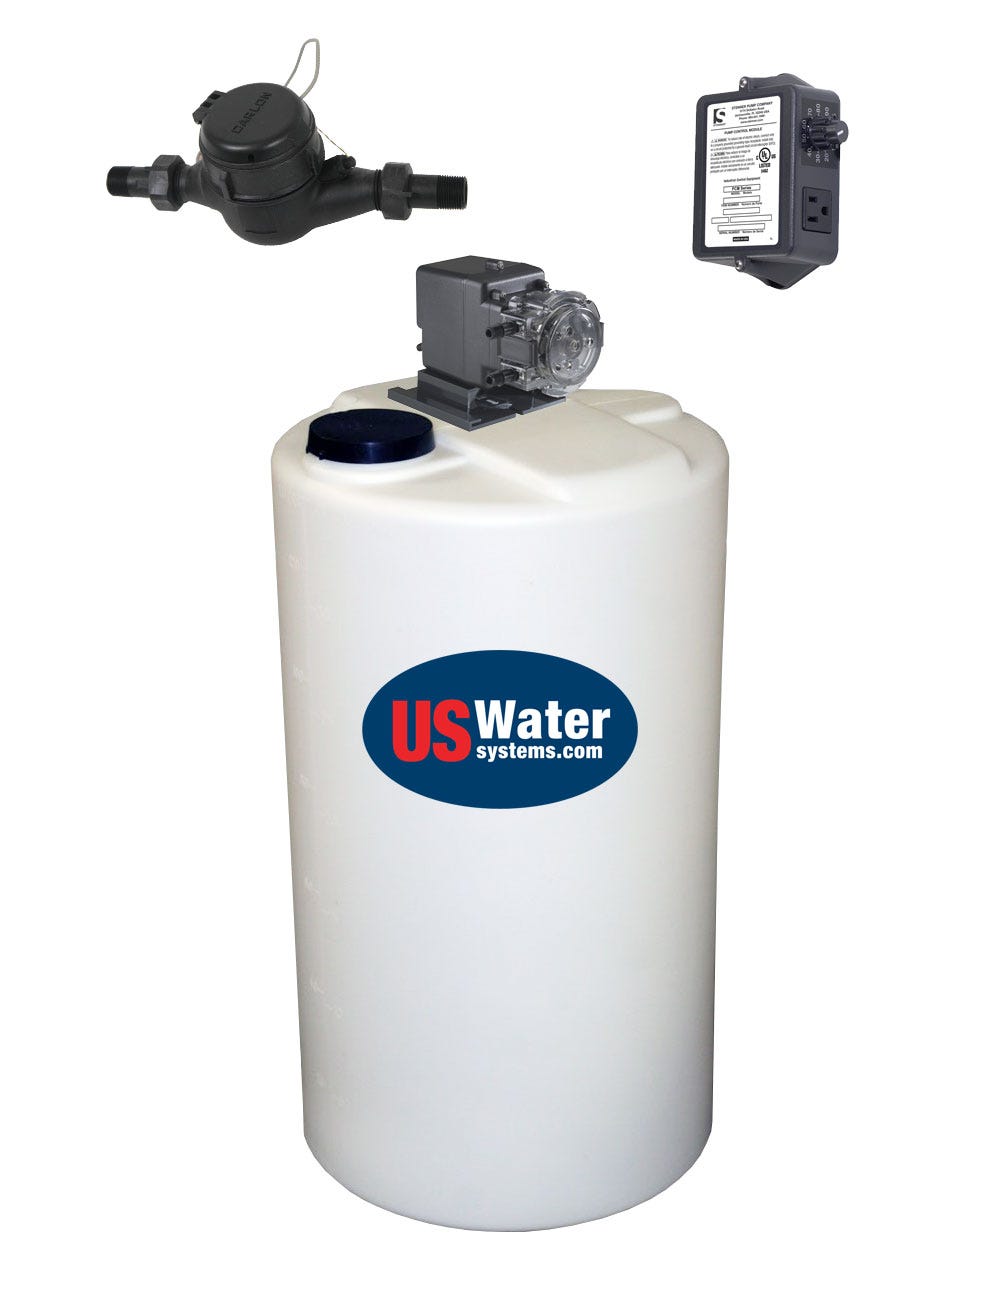 US Water Proportional Injection Tank System - 1.5"